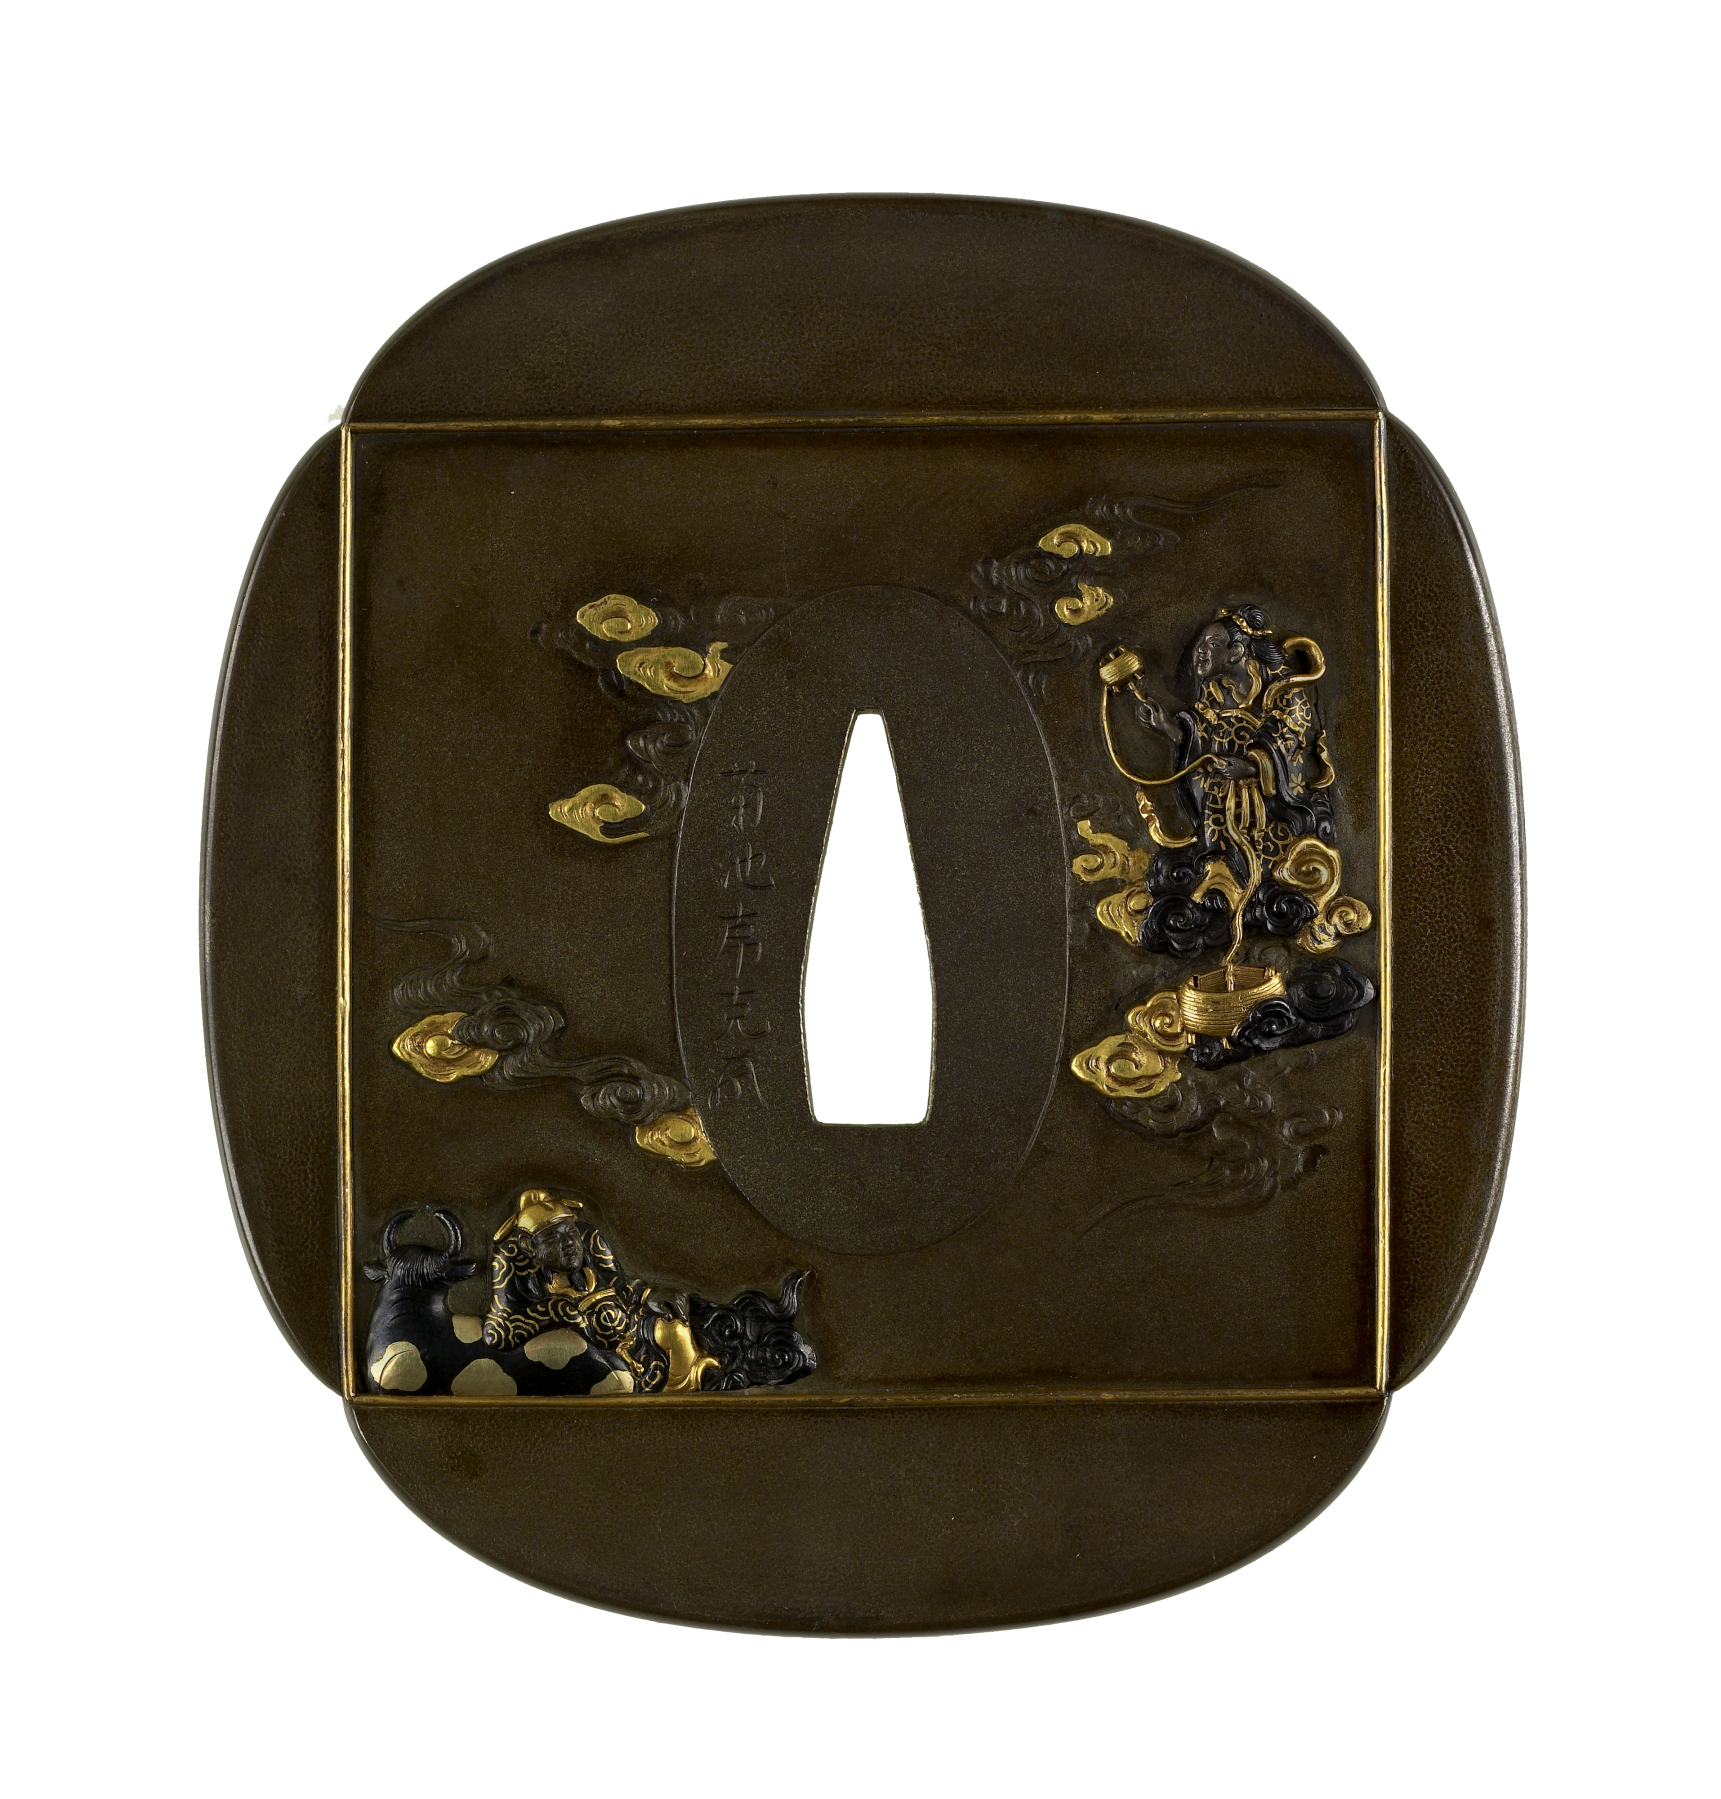 Image for Tsuba with Tanabata Festival Decorations